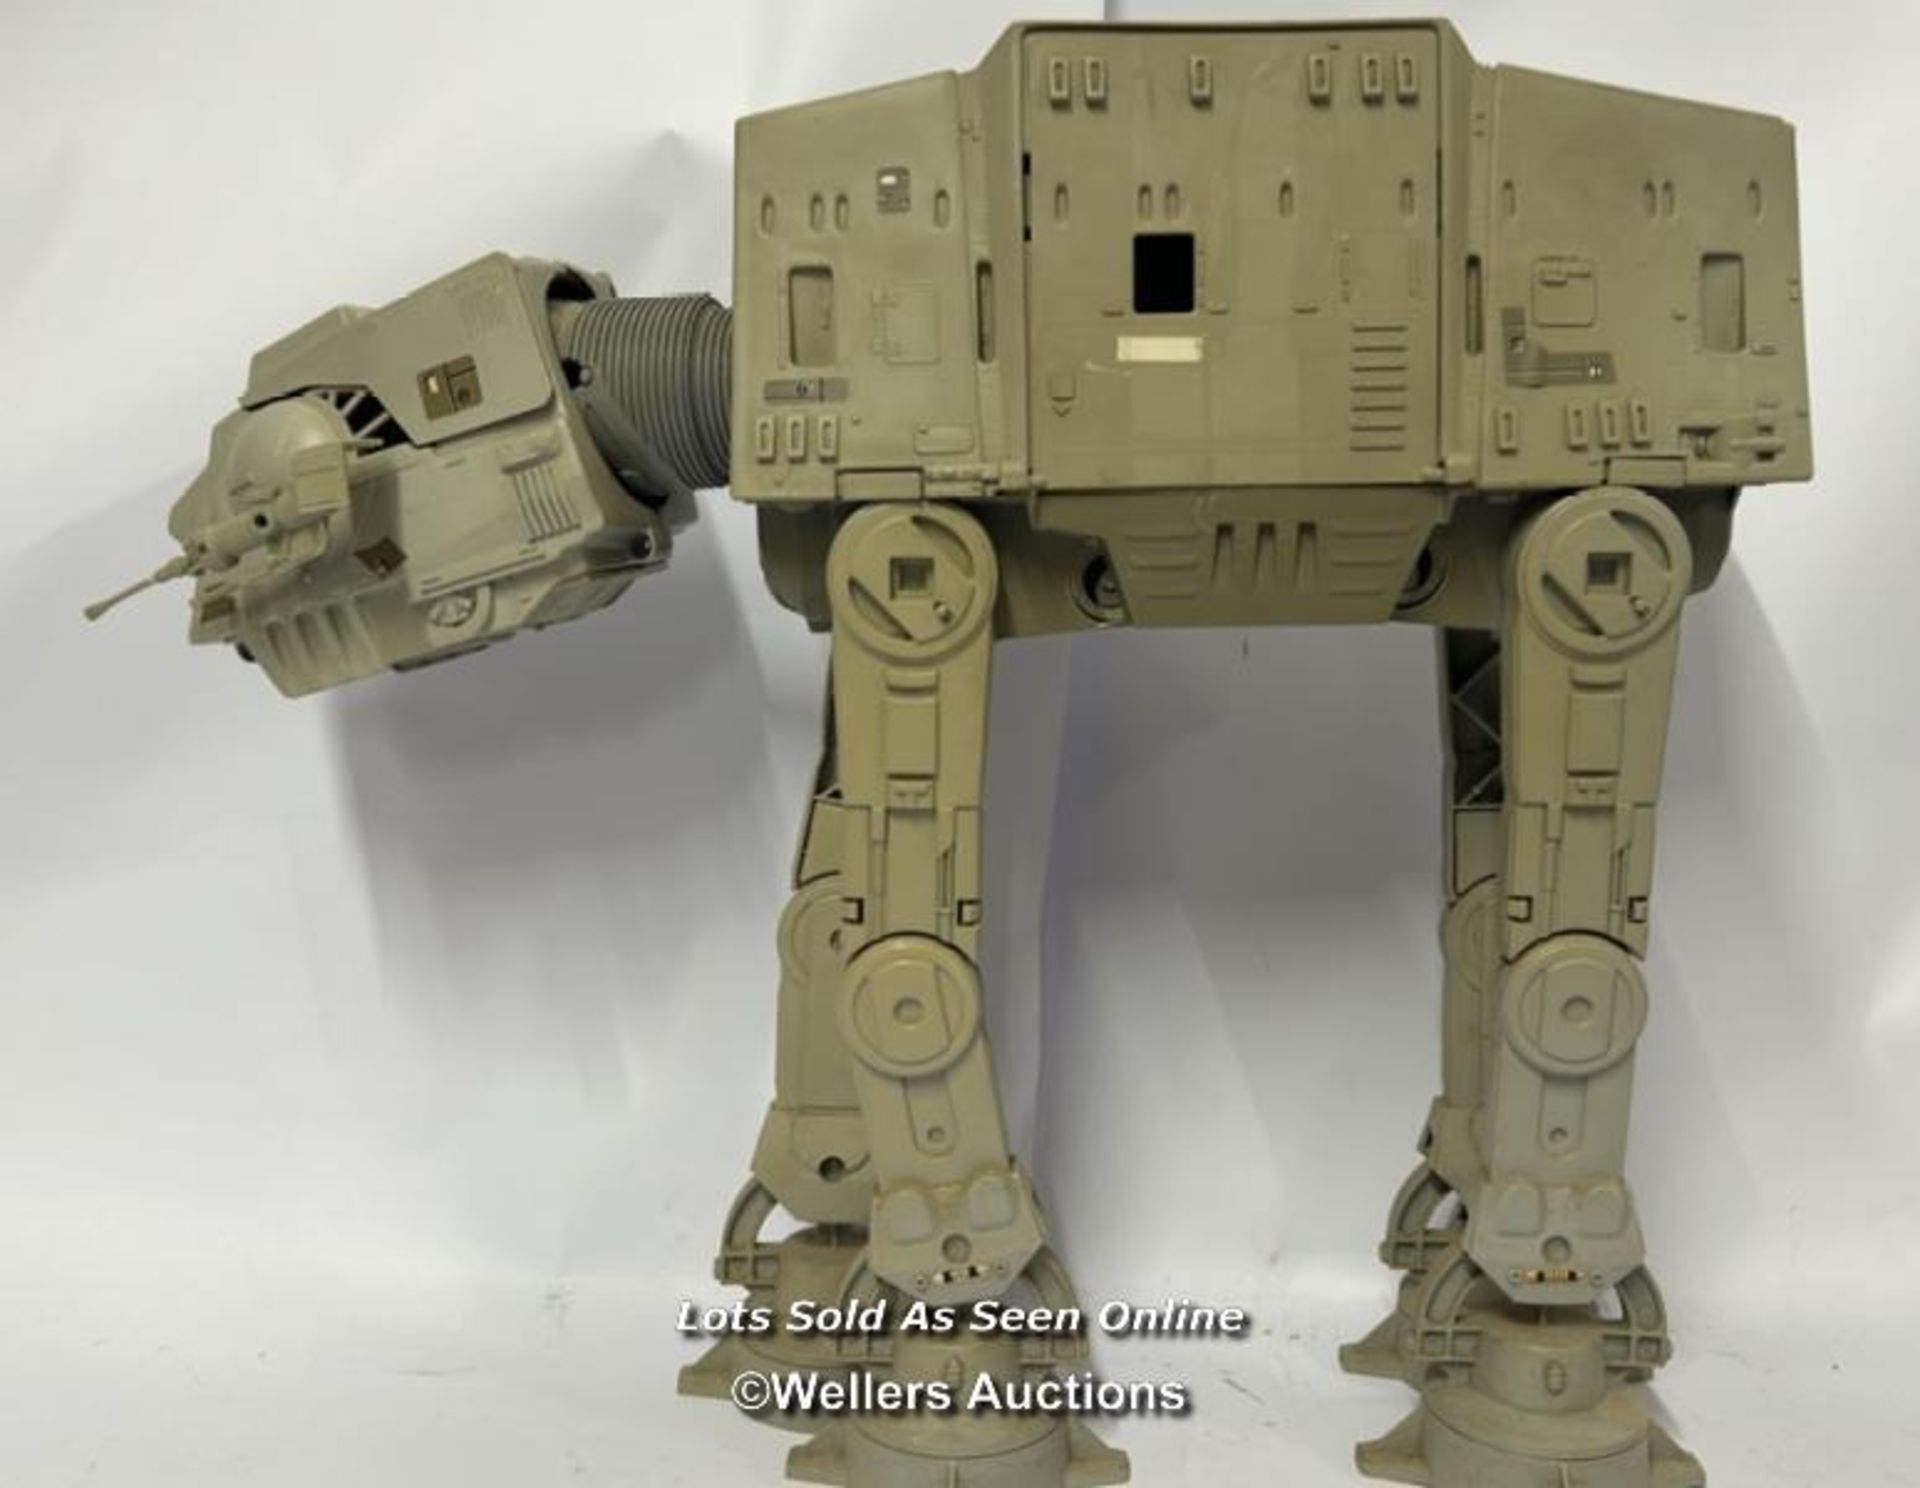 Kenner Star Wars 'The Empire Strikes Back' AT-AT, used condition but complete, chin guns yellowed - Image 3 of 9